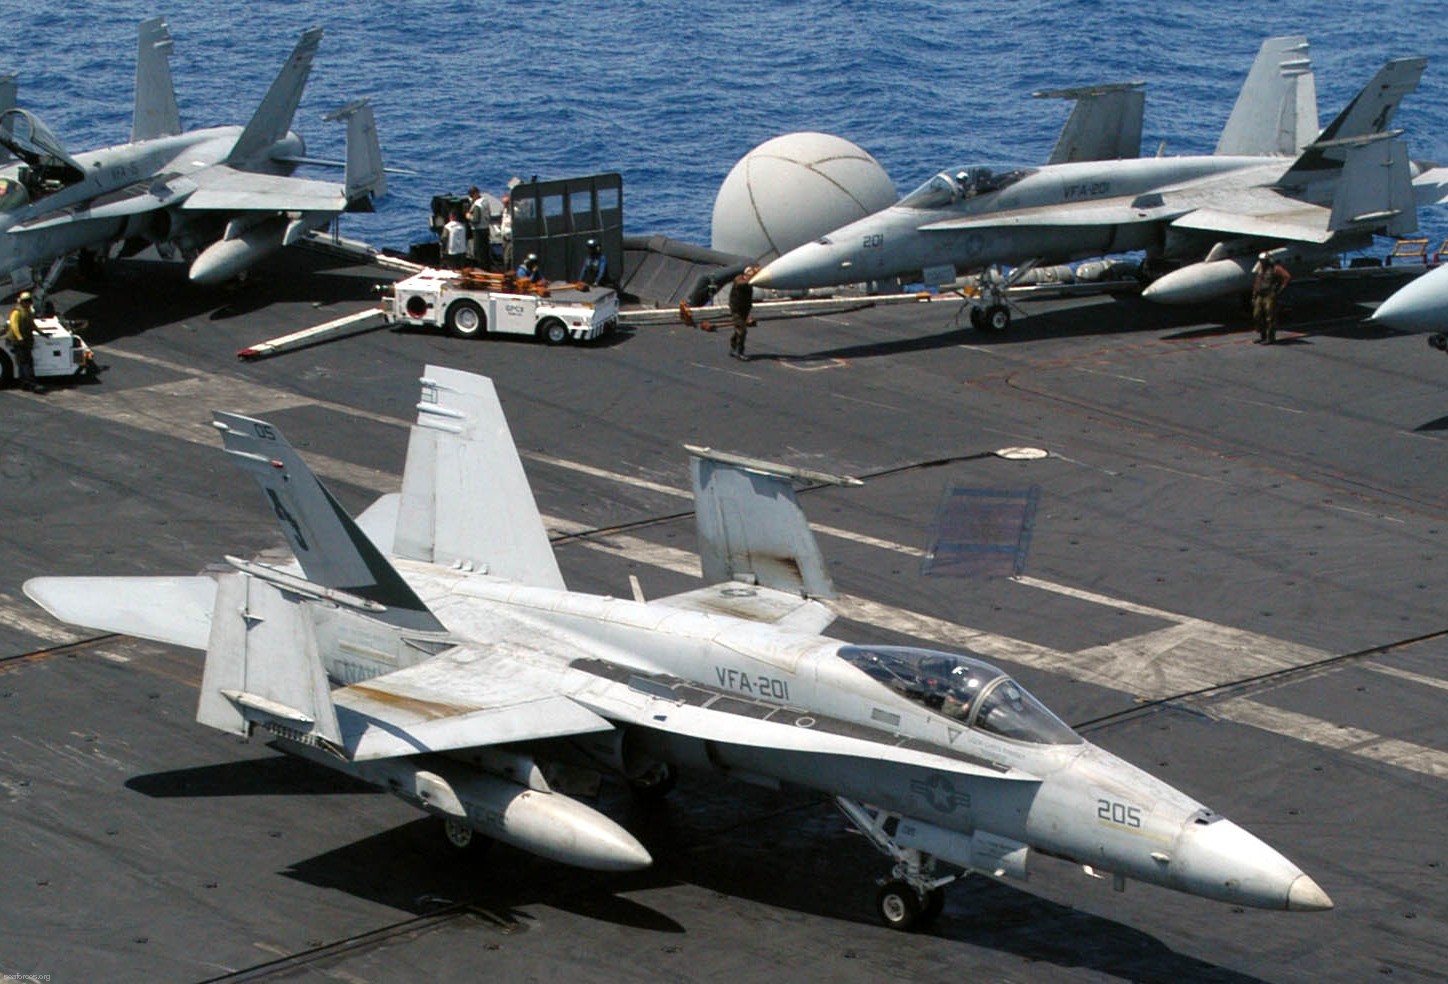 vfa-201 hunters strike fighter squadron us navy reserve f/a-18a hornet carrier air wing cvw-8 uss theodore roosevelt cvn-71 17